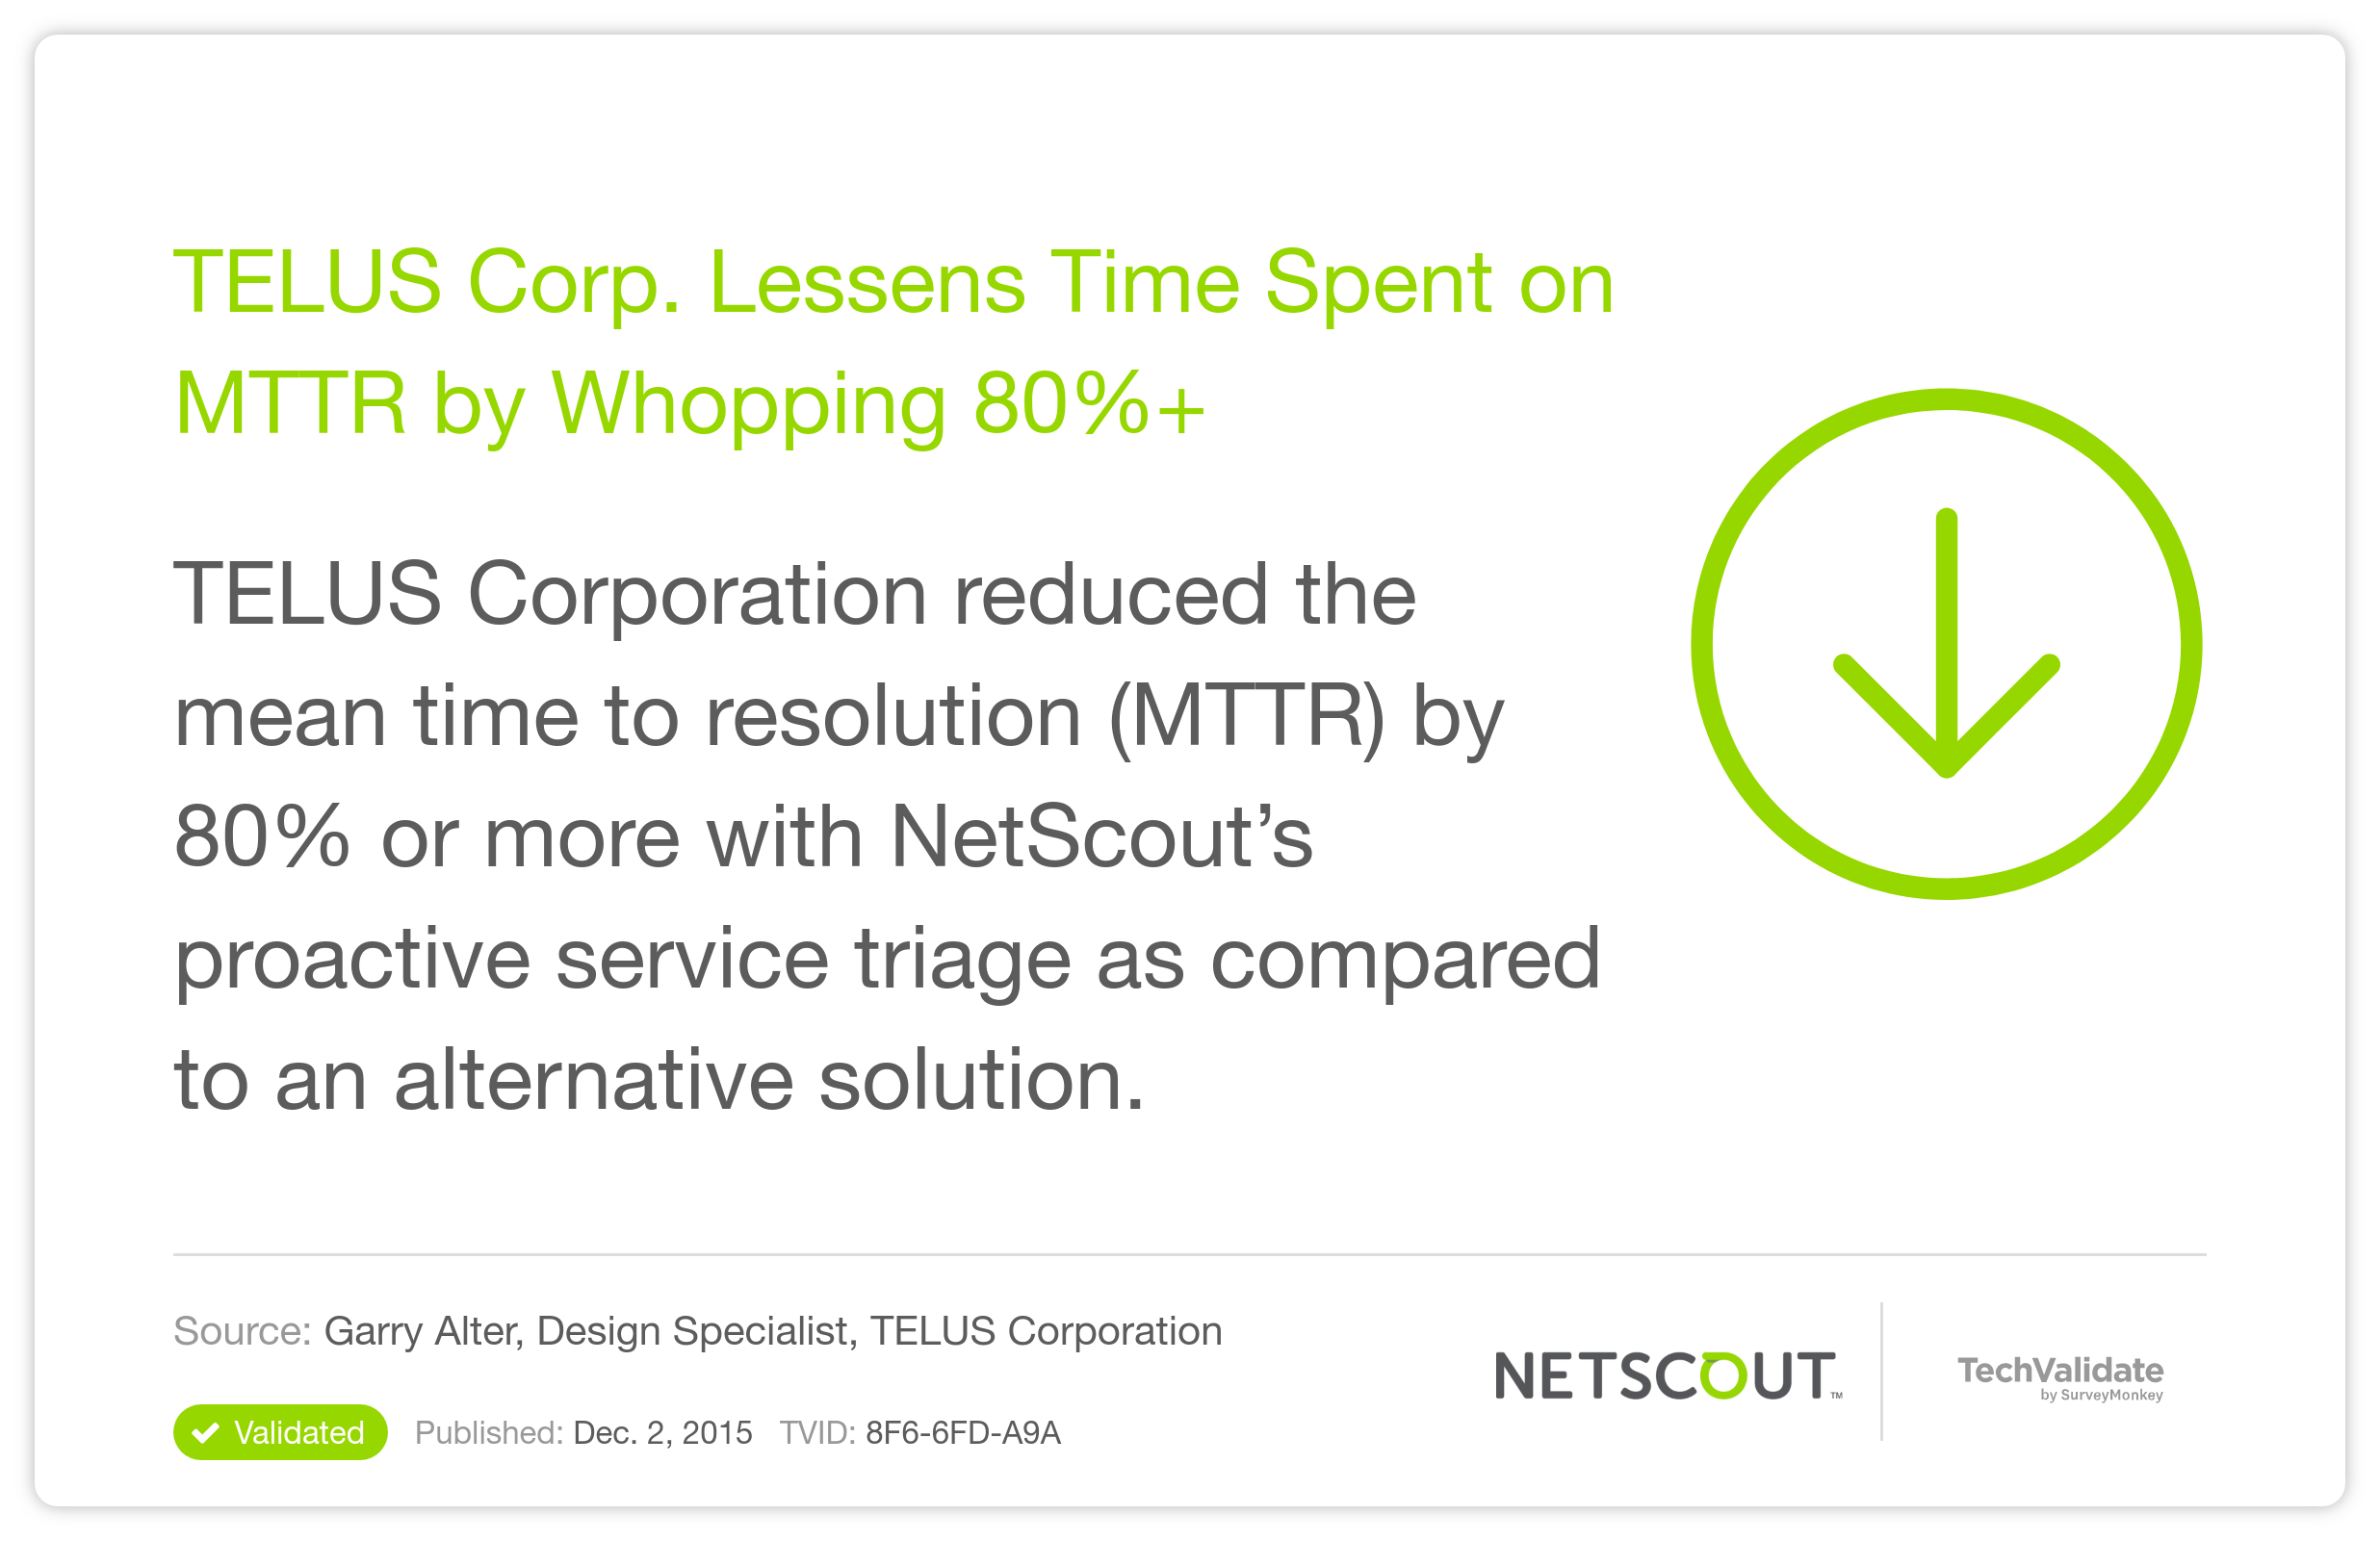 TELUS Corp. Lessens Time Spent on MTTR by Whopping 80%+